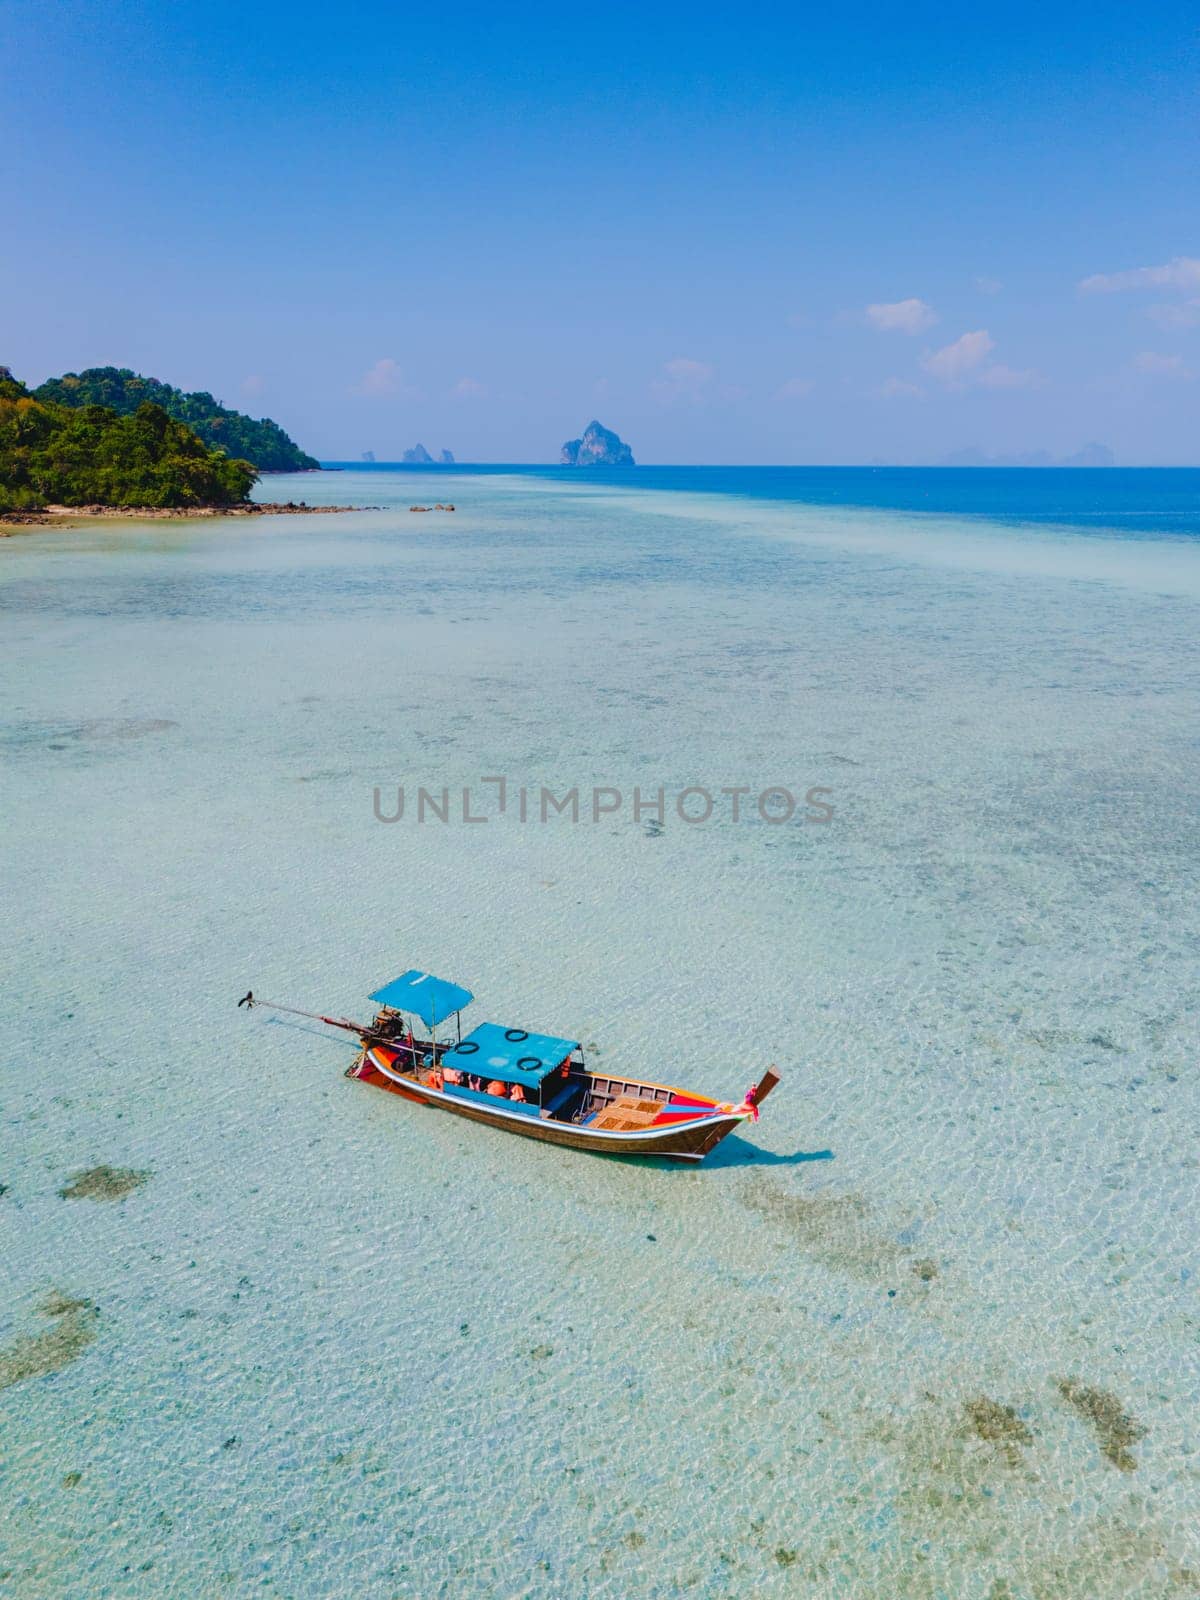 top view at a longtail boat in the turqouse colored ocean with clear water at Koh Kradan a tropical island in Trang Thailand